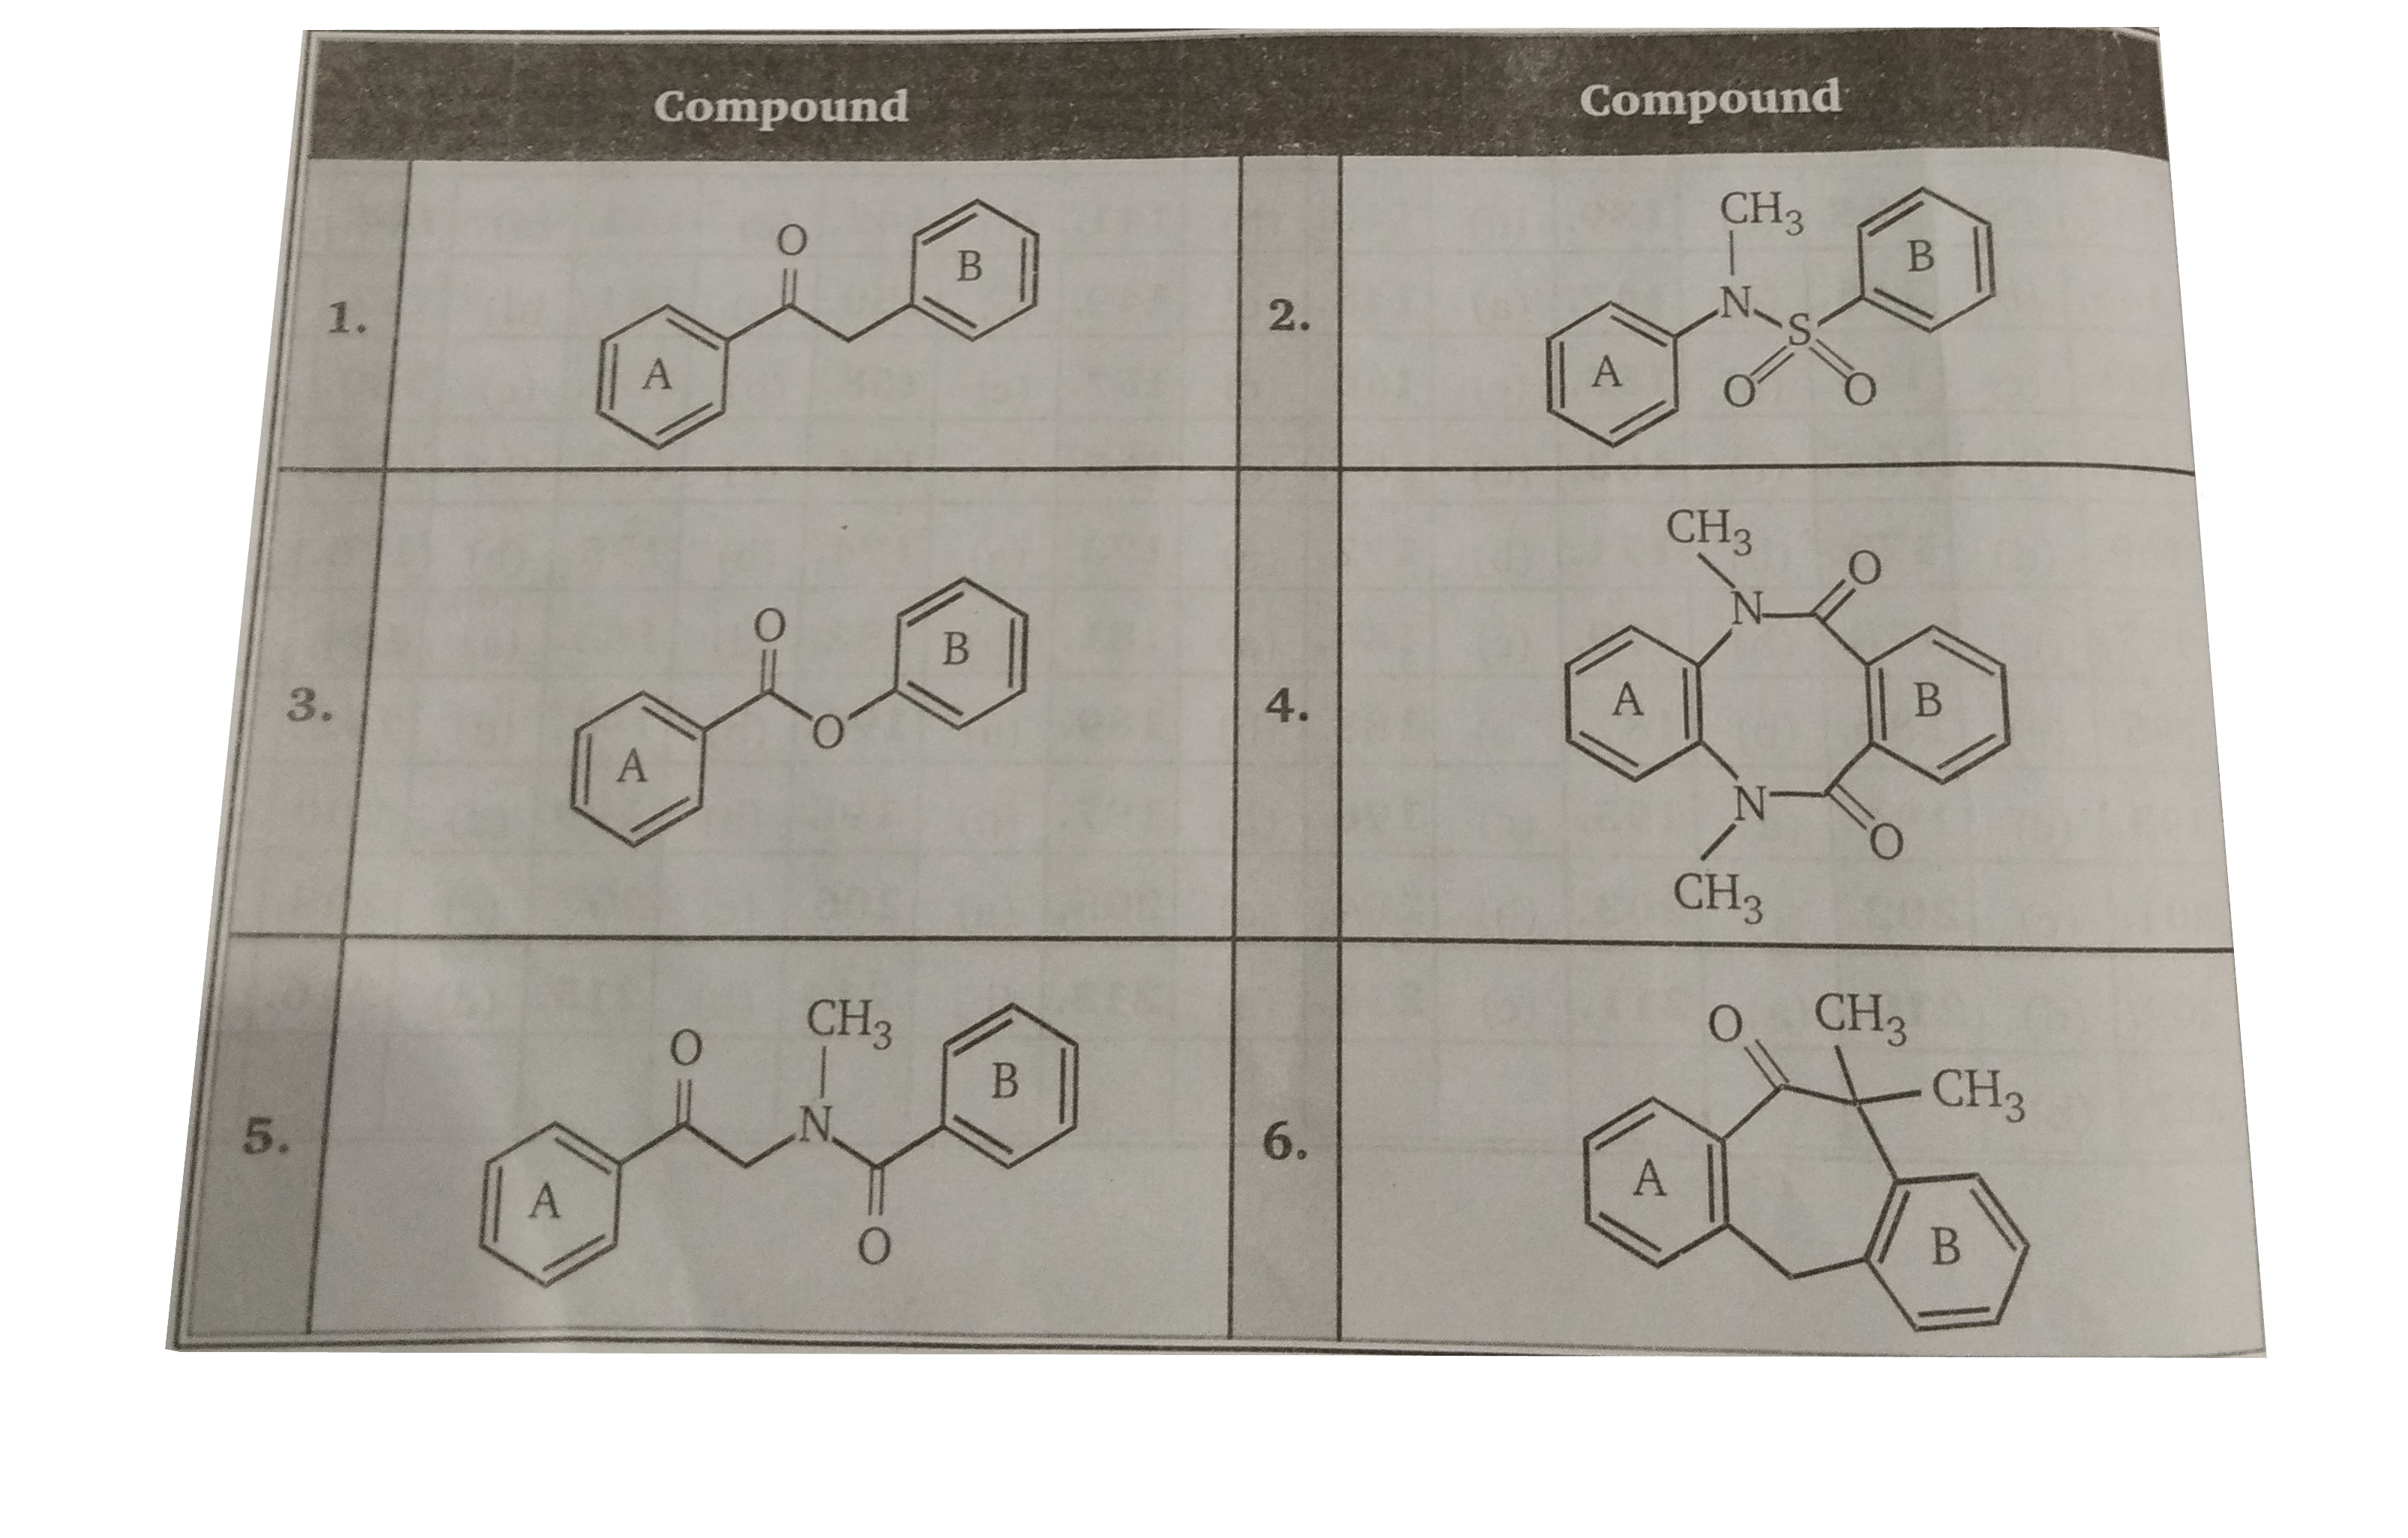 Each of the six compounds shown at the bottom of the page has two arom